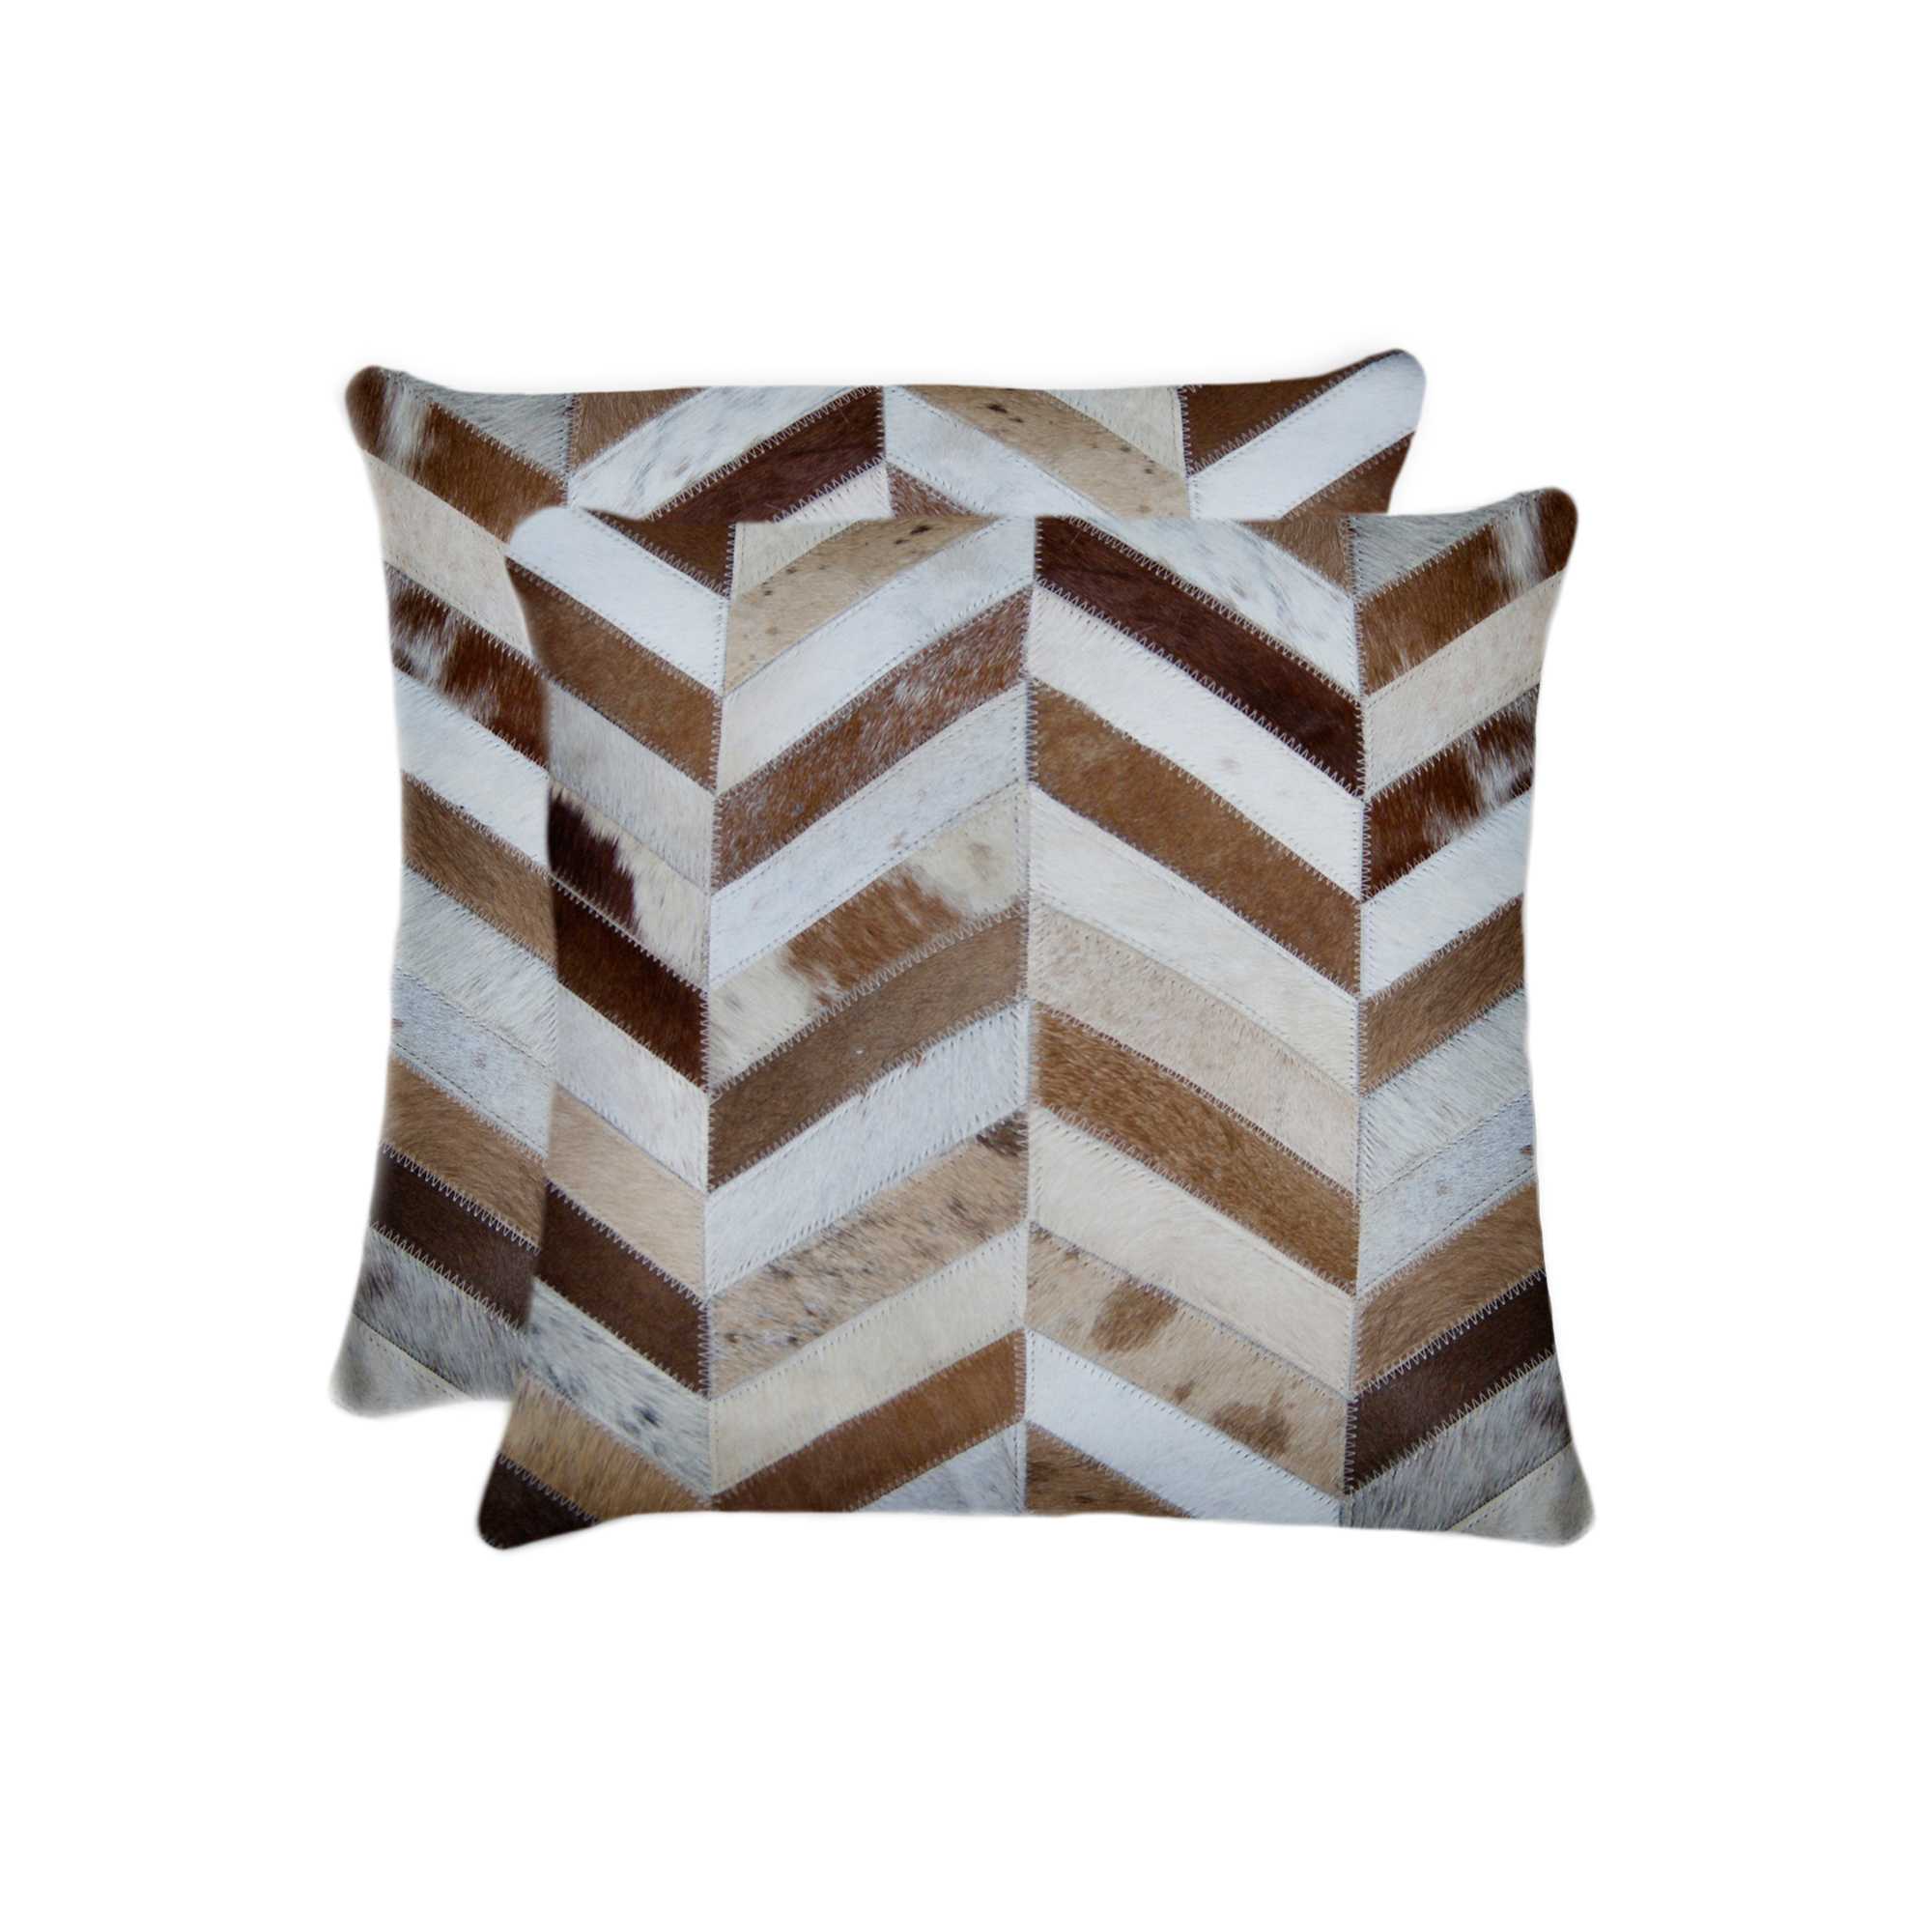 18" x 18" x 5" Modern And Natural, Cowhide - Pillow 2-Pack